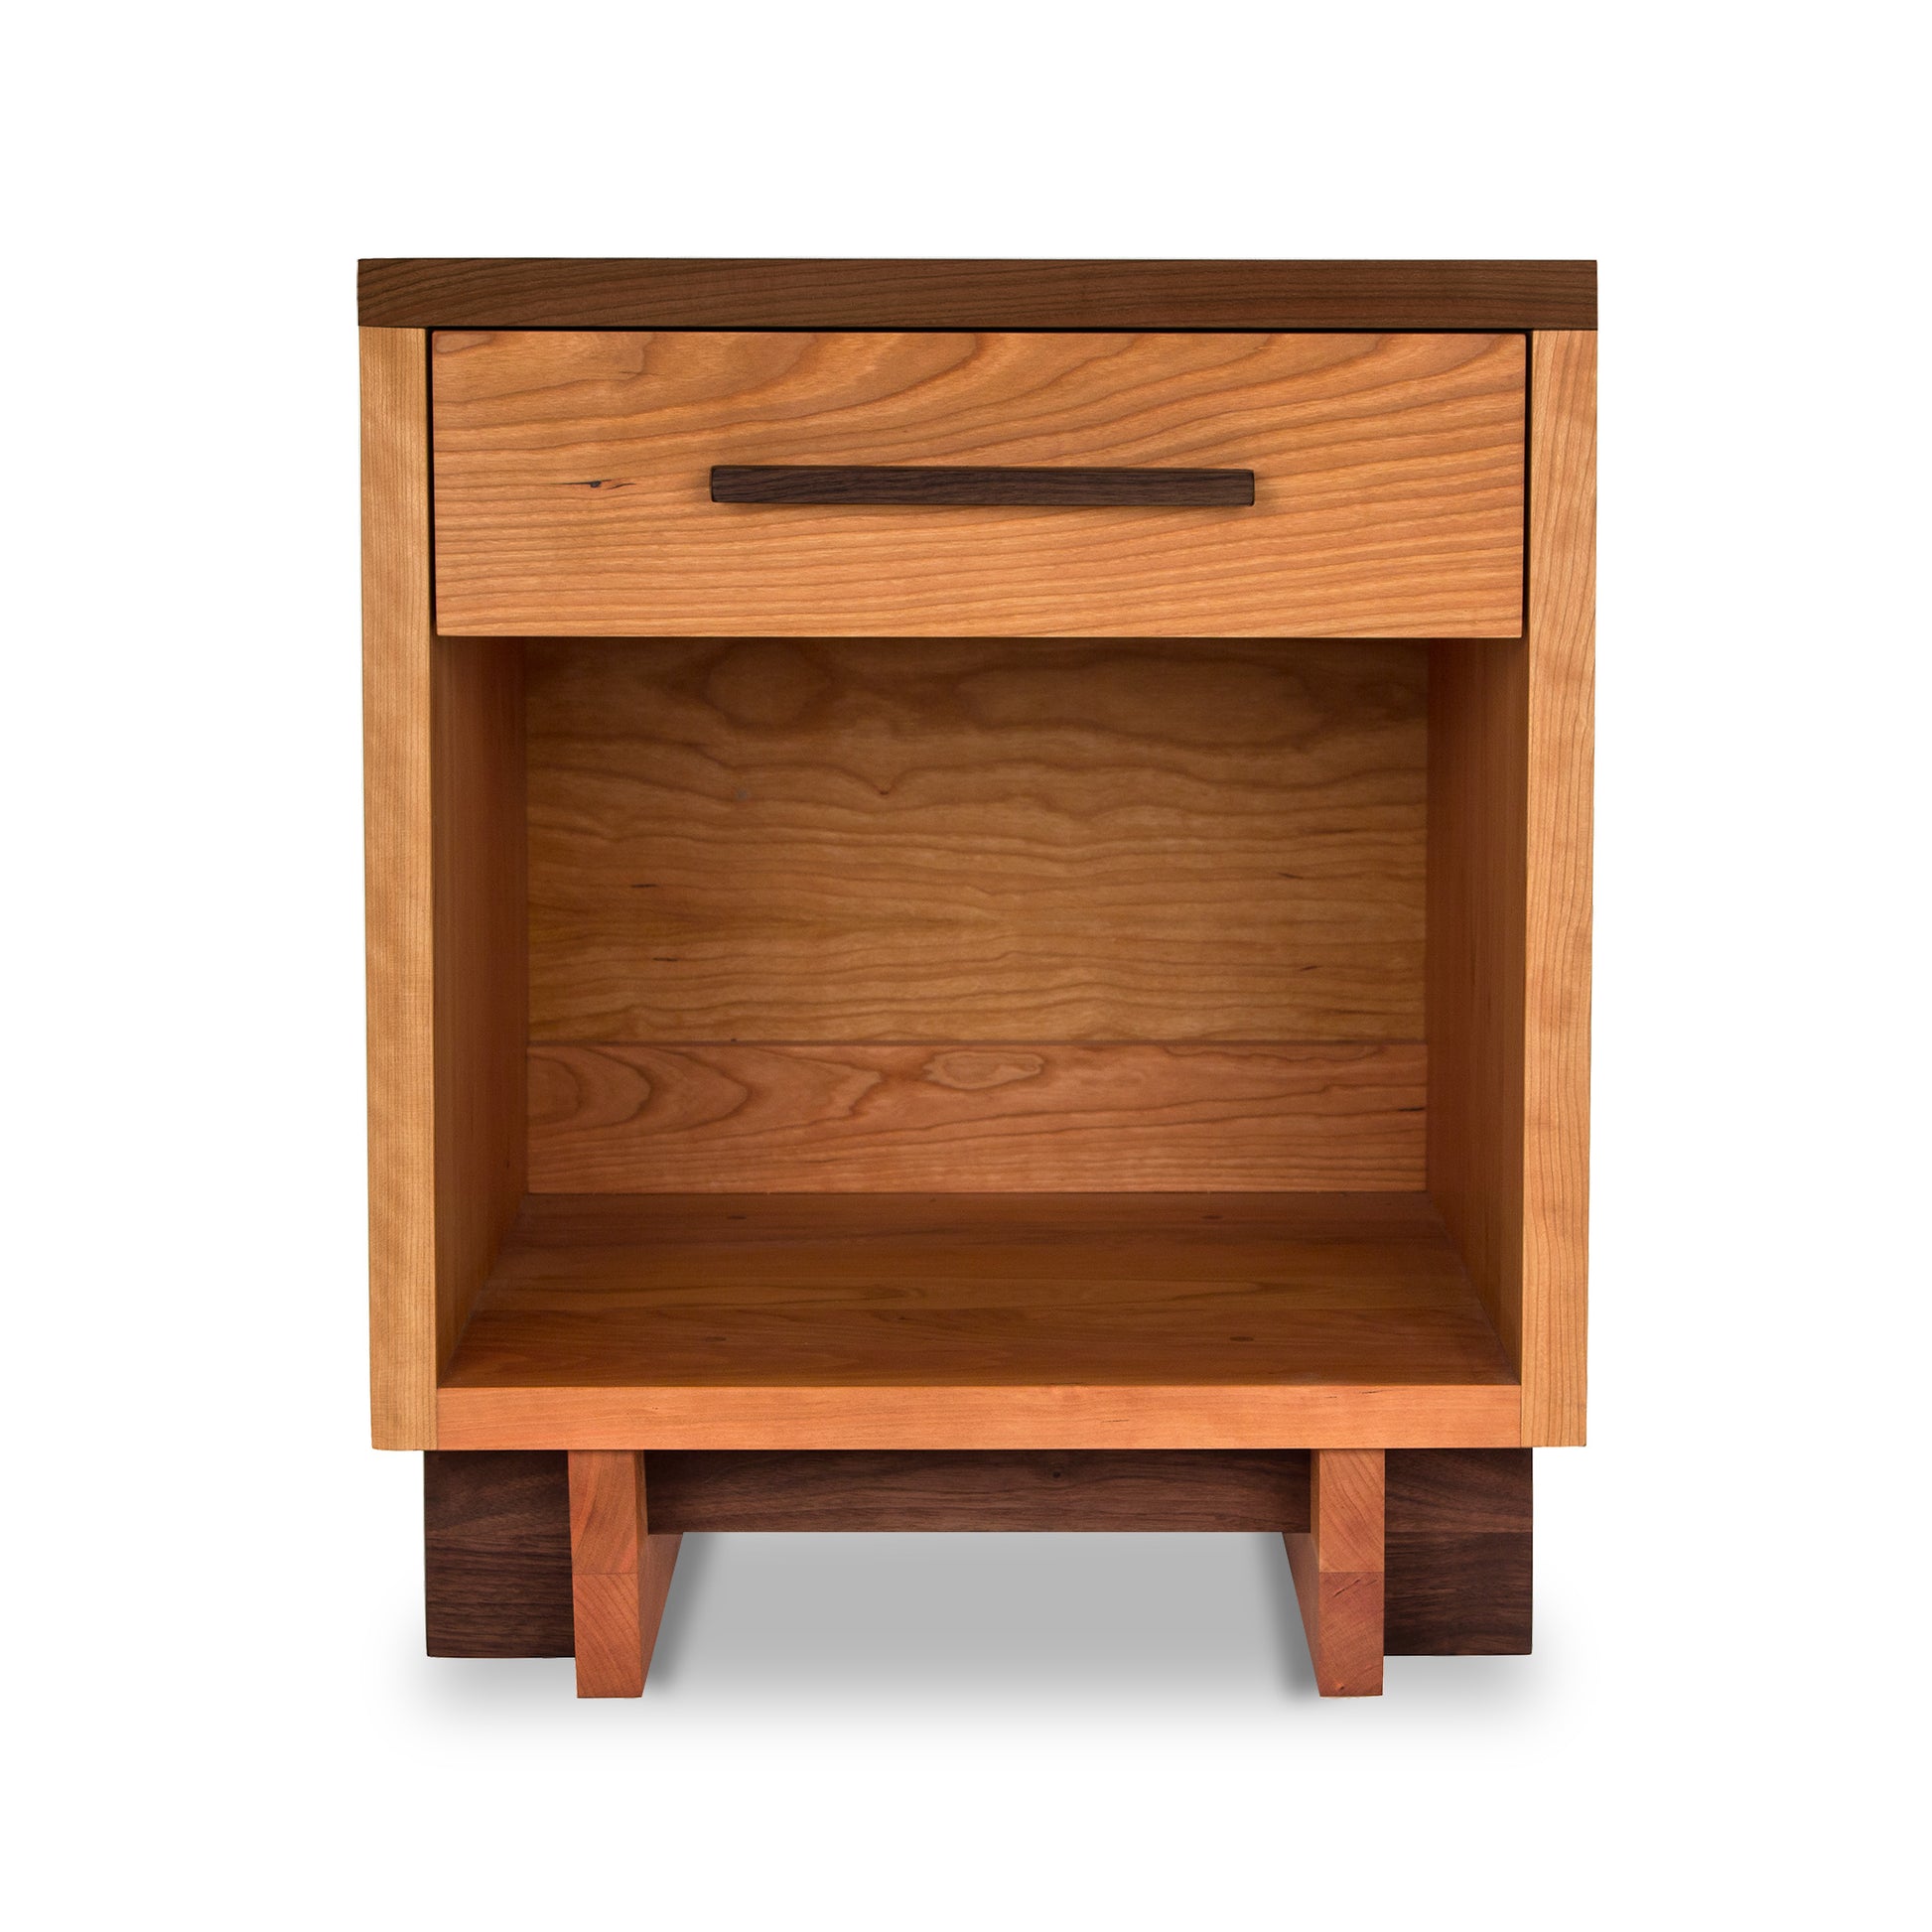 A Modern American 1-Drawer Enclosed Shelf Nightstand by Vermont Furniture Designs, with a single drawer and an open shelf, isolated on a white background. The nightstand features a rich wood grain finish and sturdy, minimalistic design.